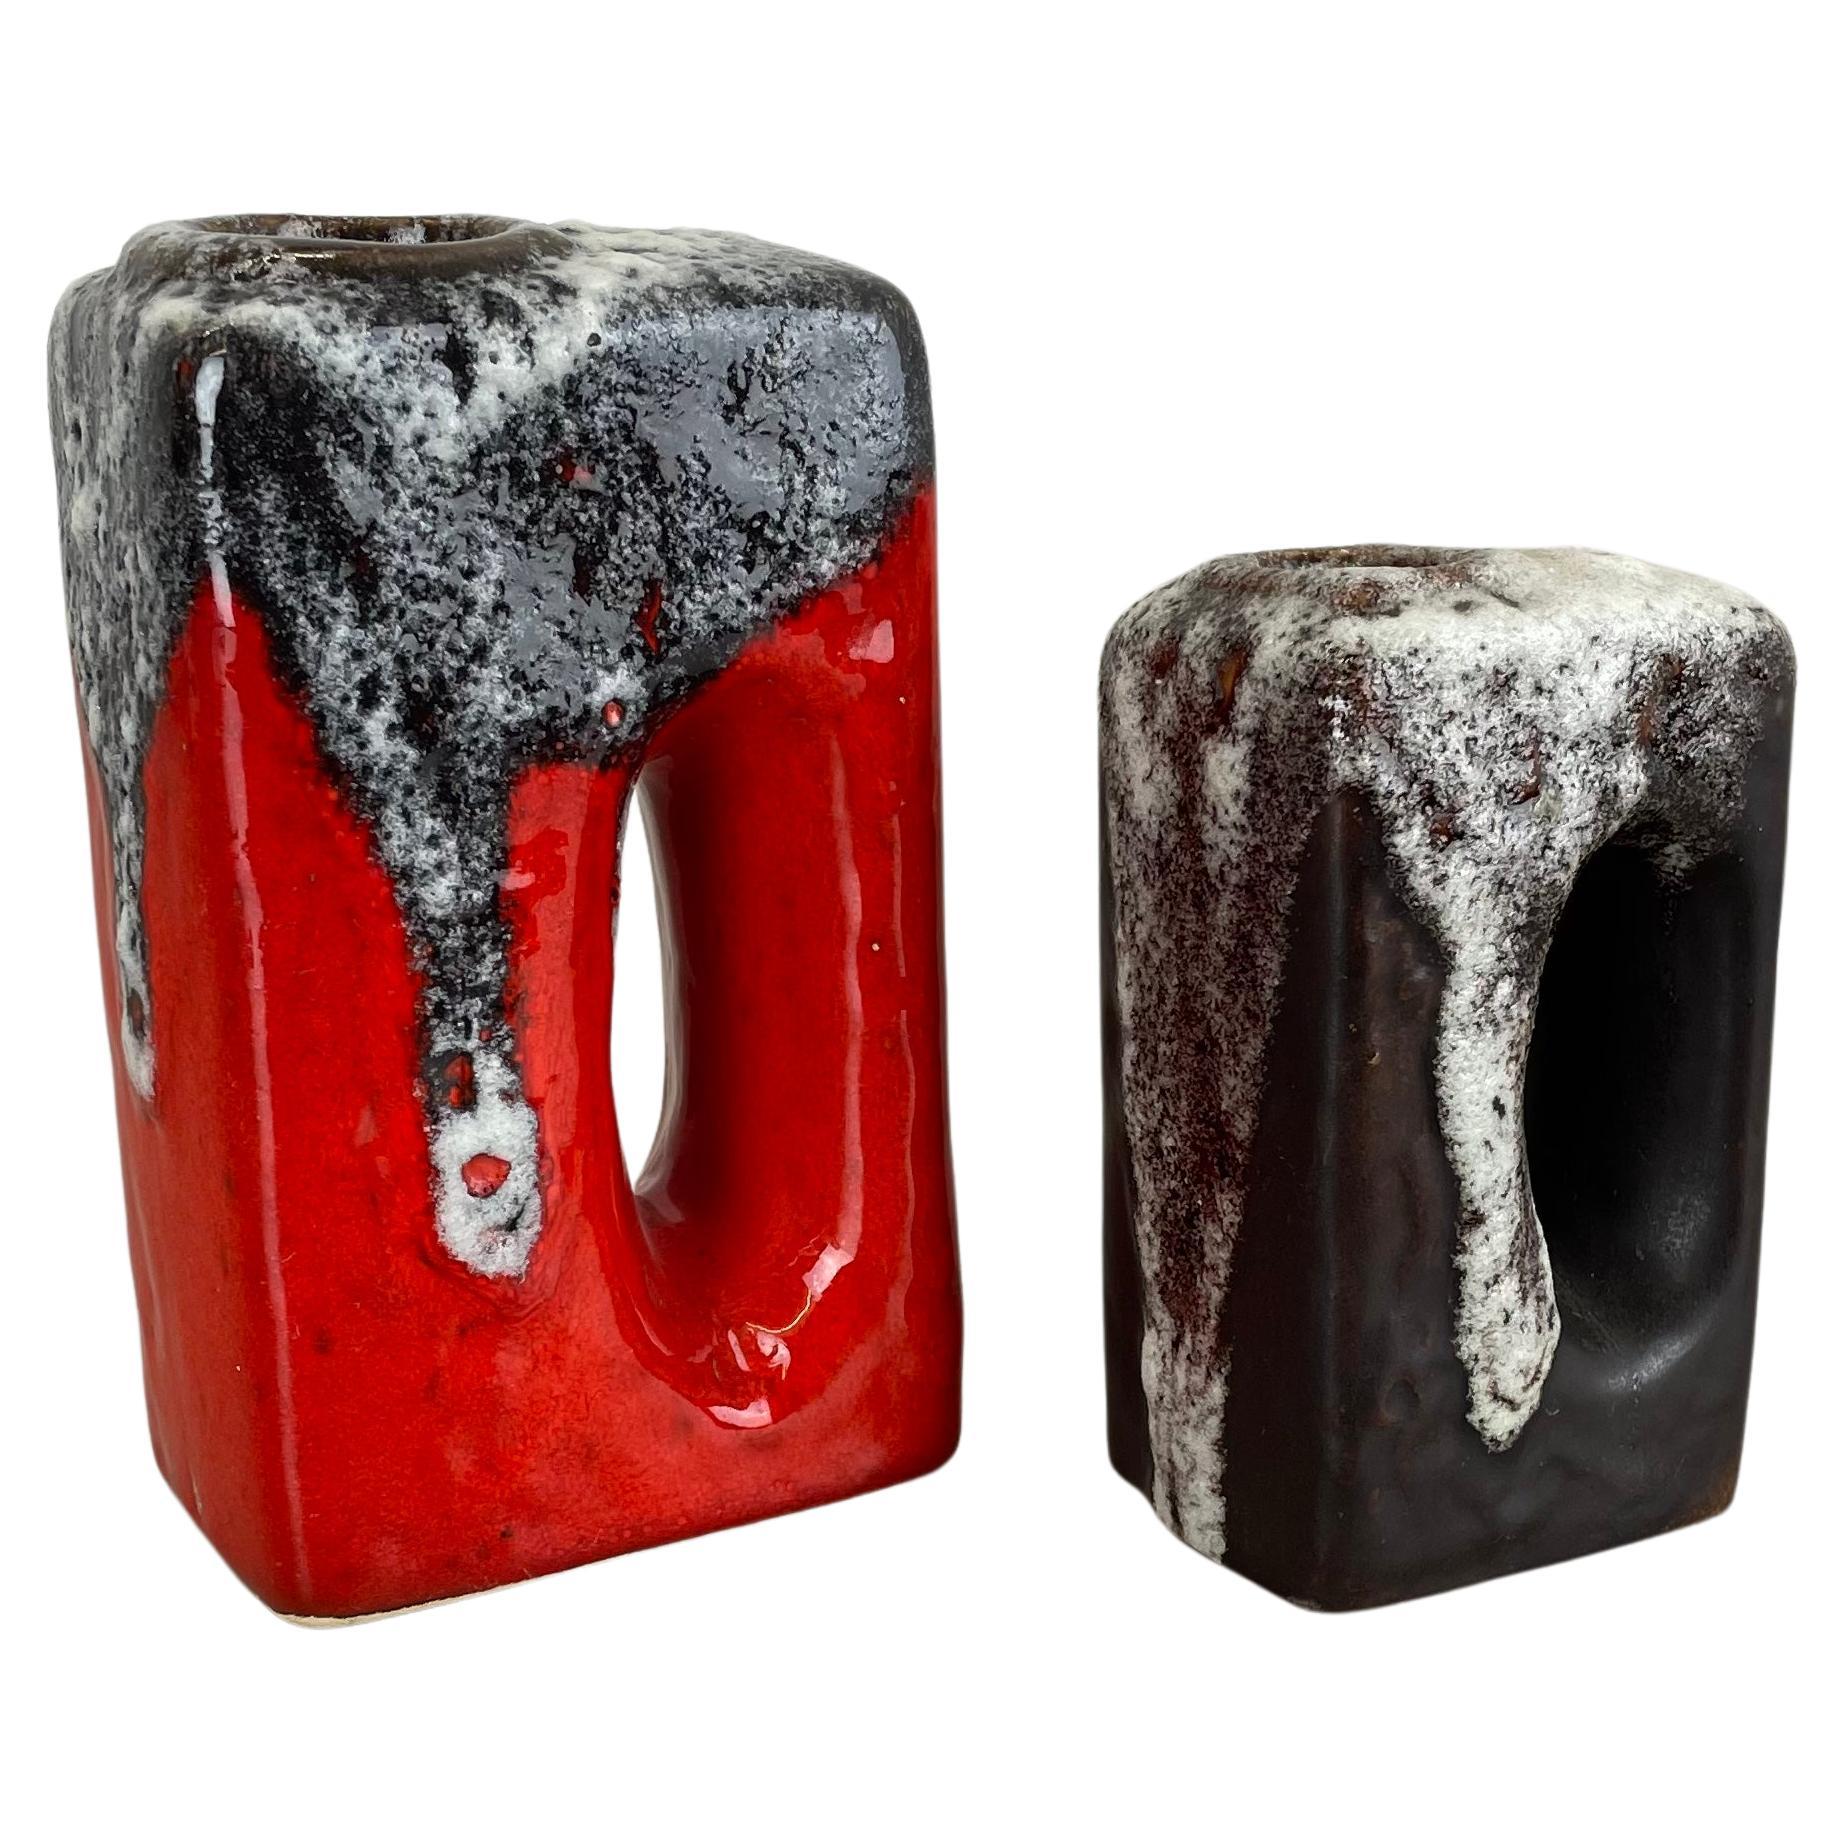 Set of two Pottery Fat Lava "HOLE" Vases by Übelacker Ceramics, Germany, 1970 For Sale